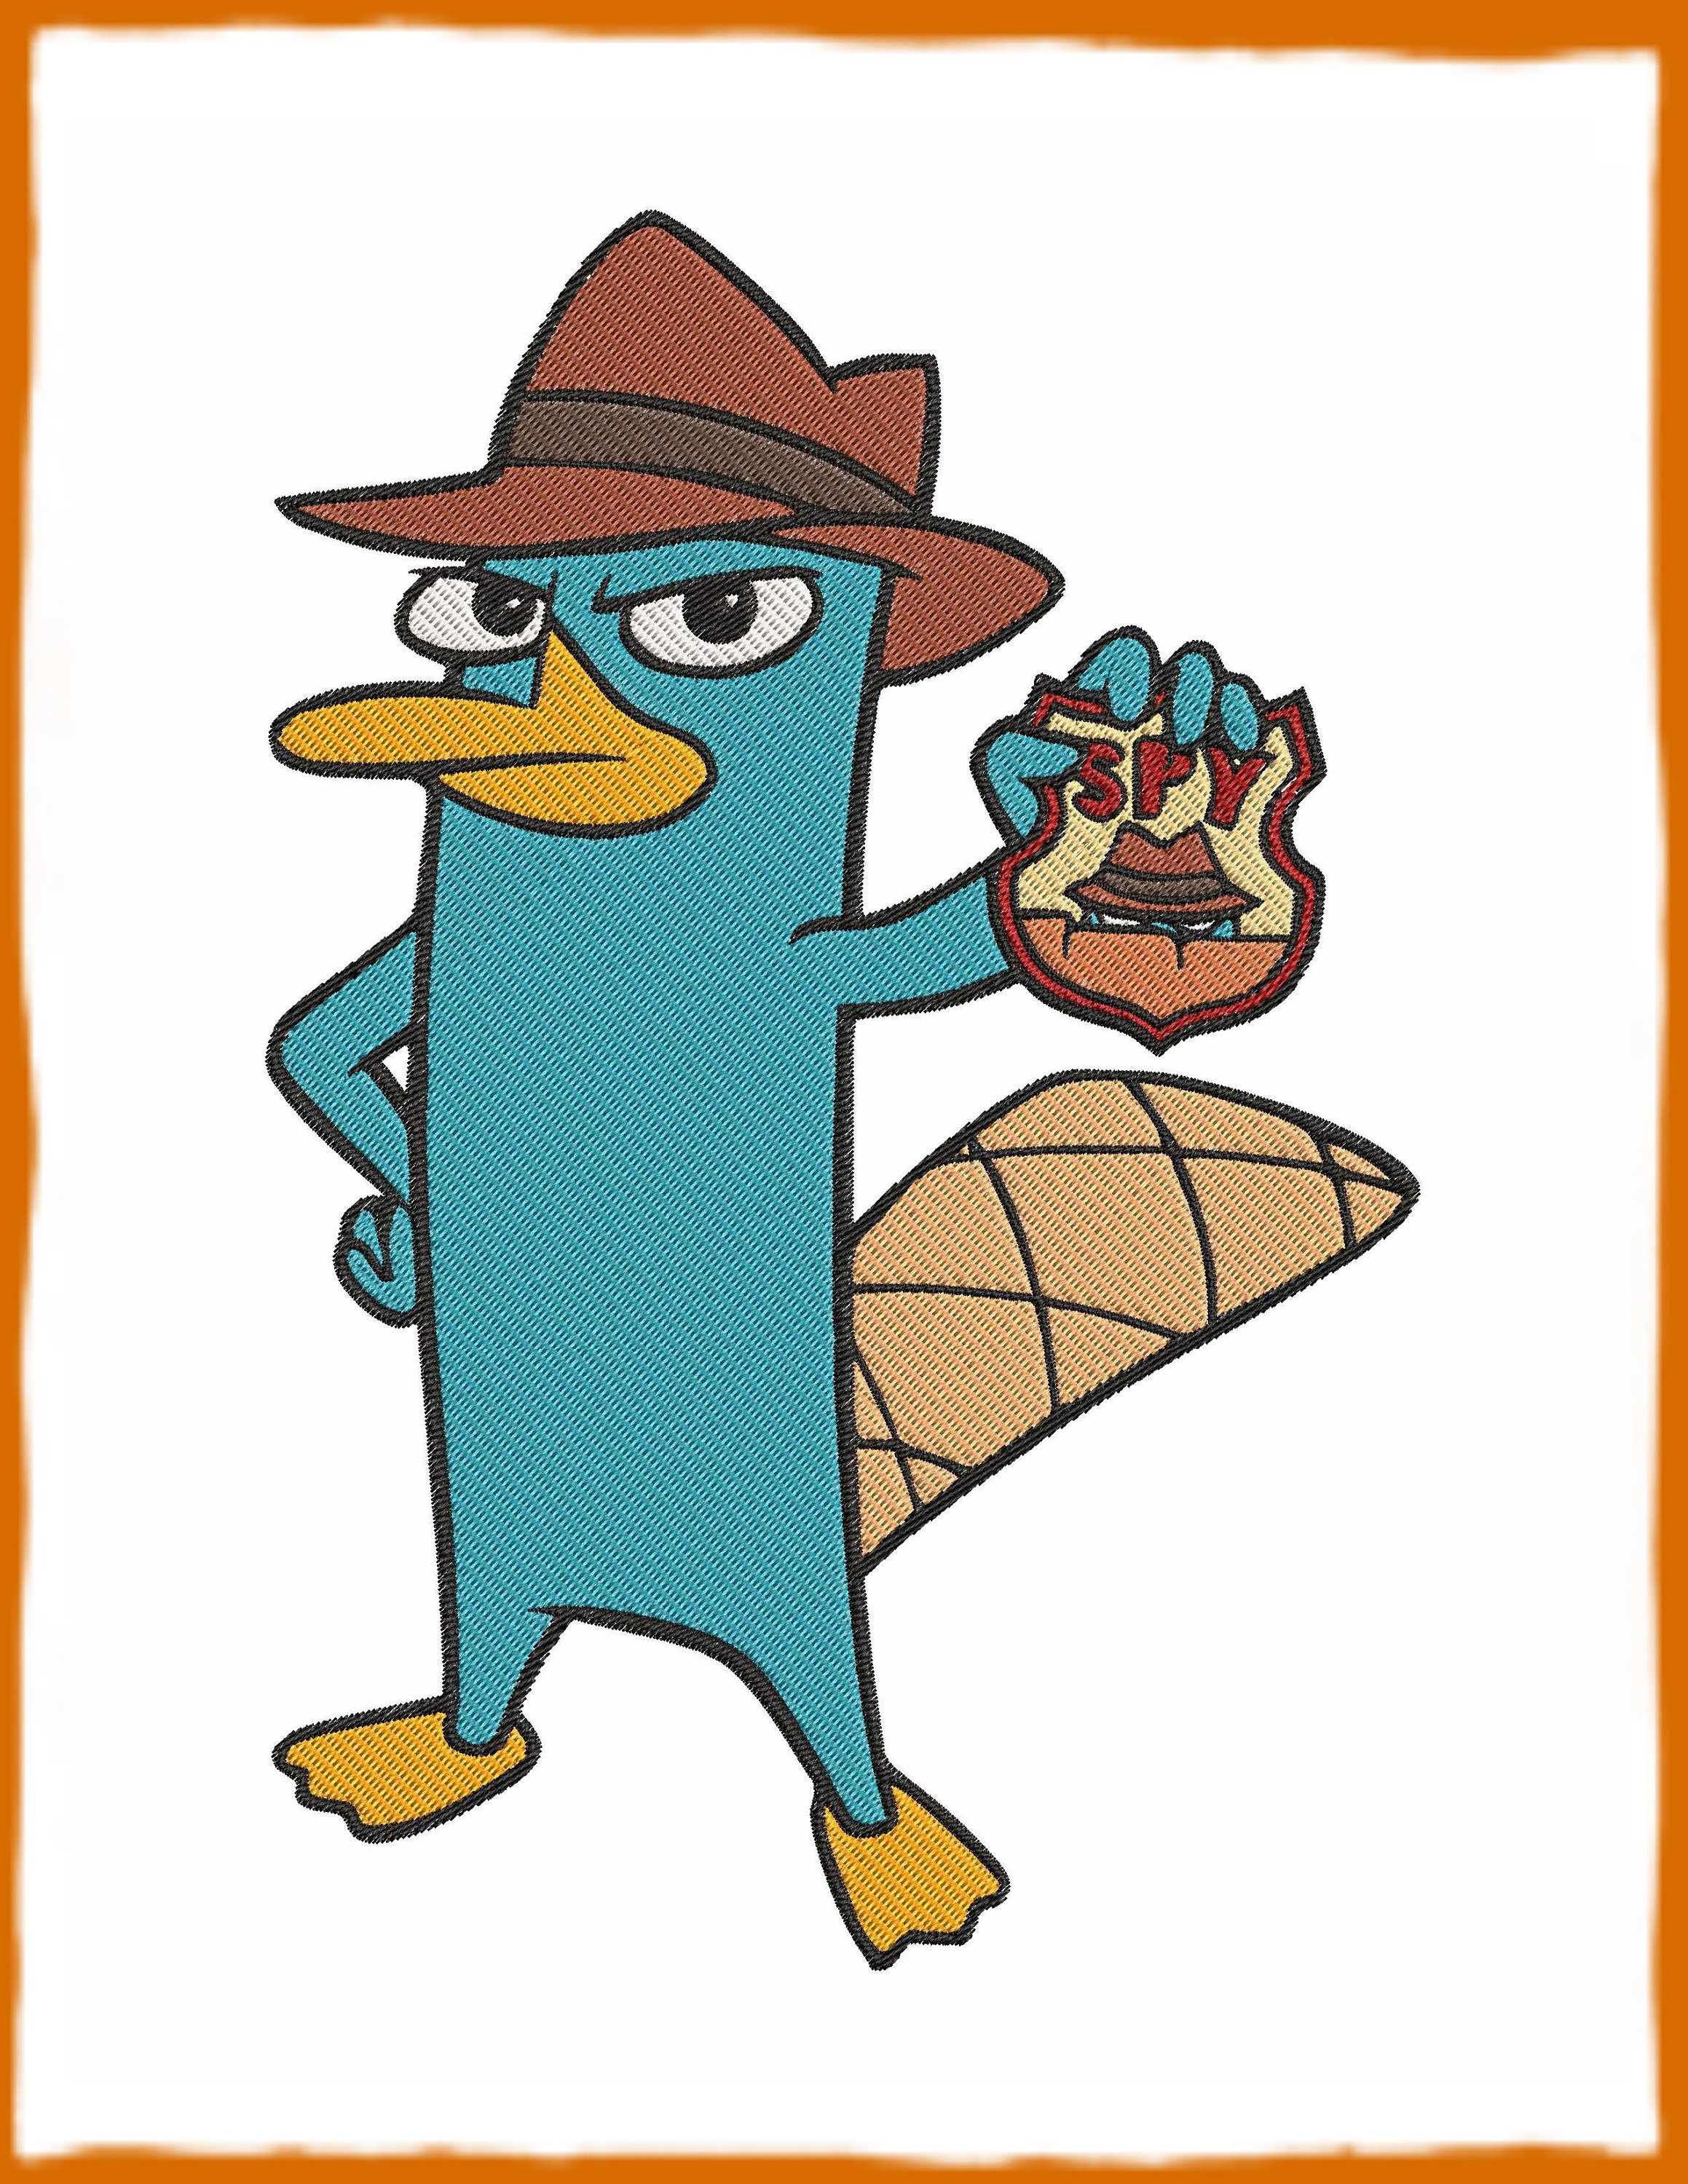 Perry the Platypus for for 𝓛𝓸𝓾𝓲𝓼 𝓥𝓾𝓲𝓽𝓽𝓸𝓷 (Concept